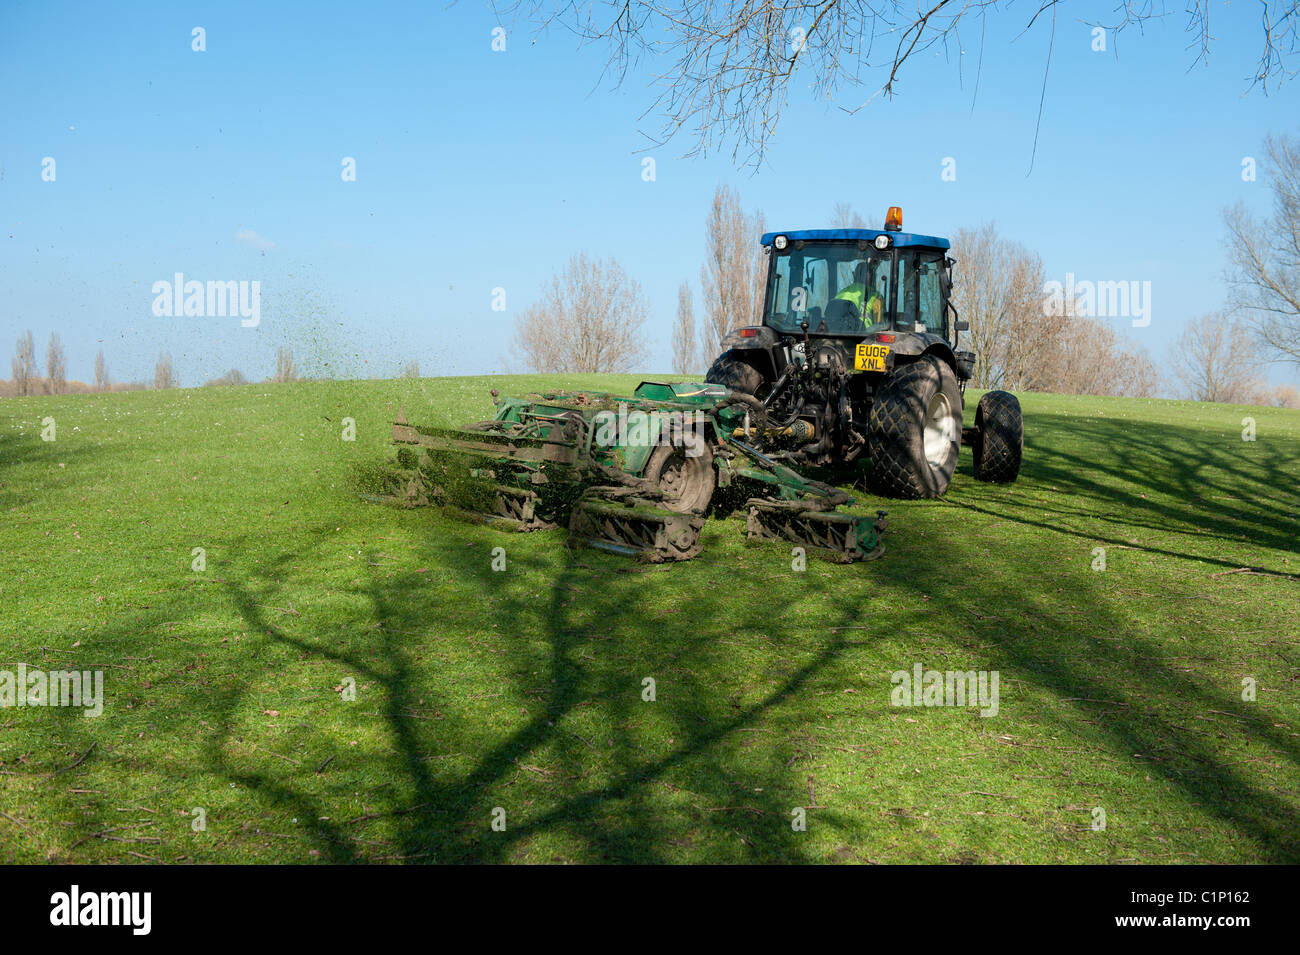 A council tractor cutting the grass in a public park. Stock Photo